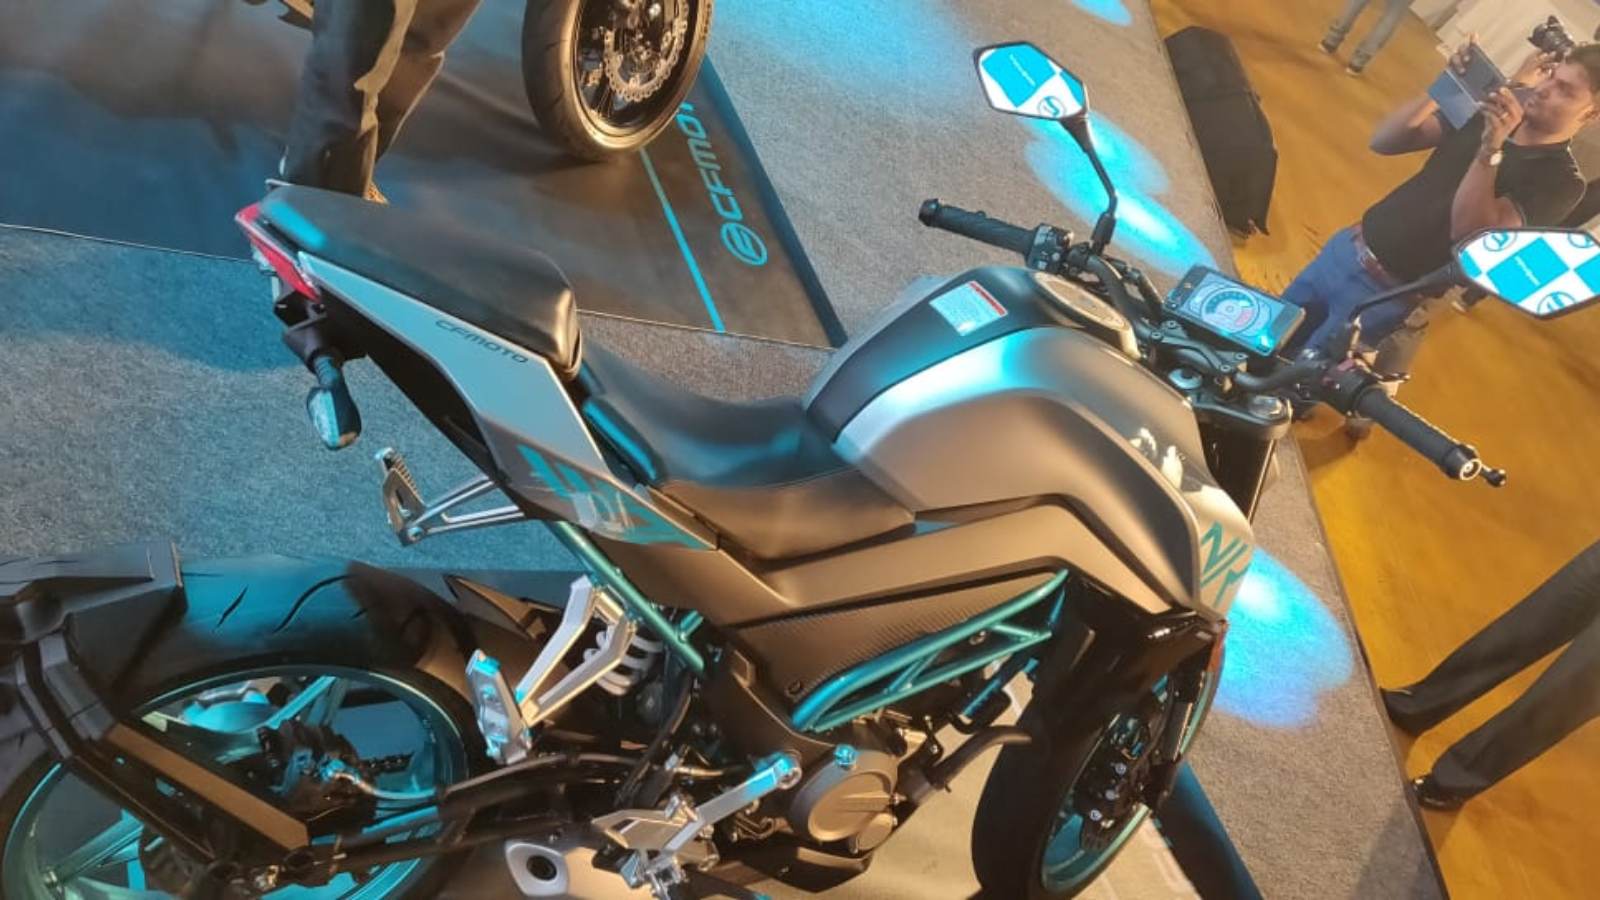 Cfmoto Launches The New 300 Nk Streetfighter Priced At Inr 2 29 Lakh Motoroids